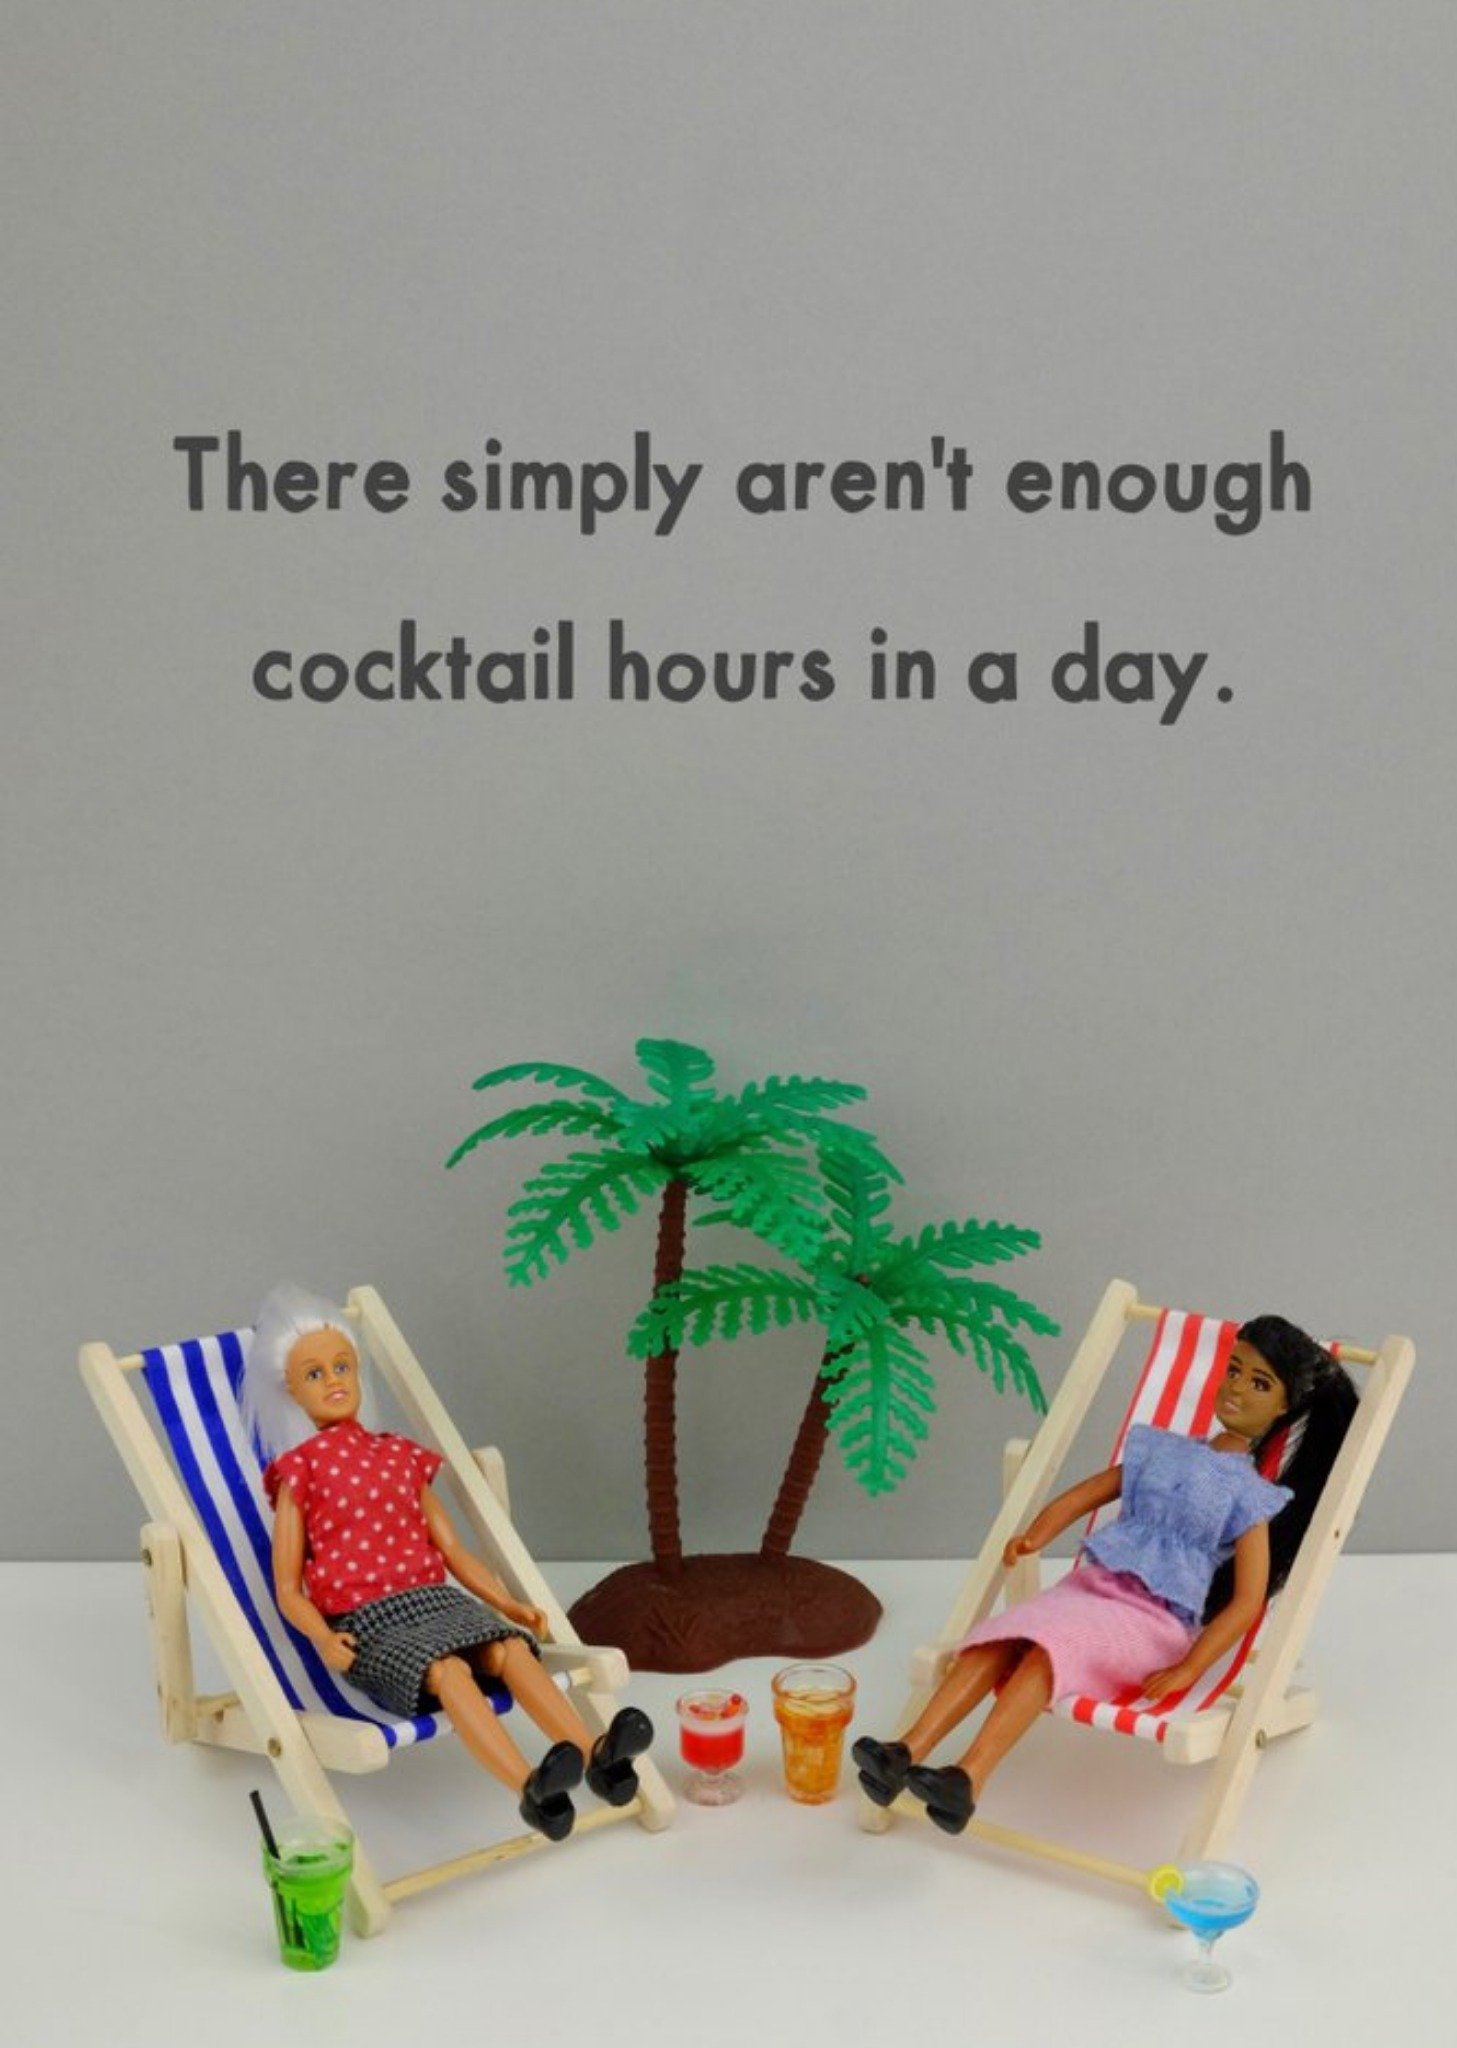 Bold And Bright Funny Photographic Female Figurines In Deck Chairs Drinking Humour Card, Large